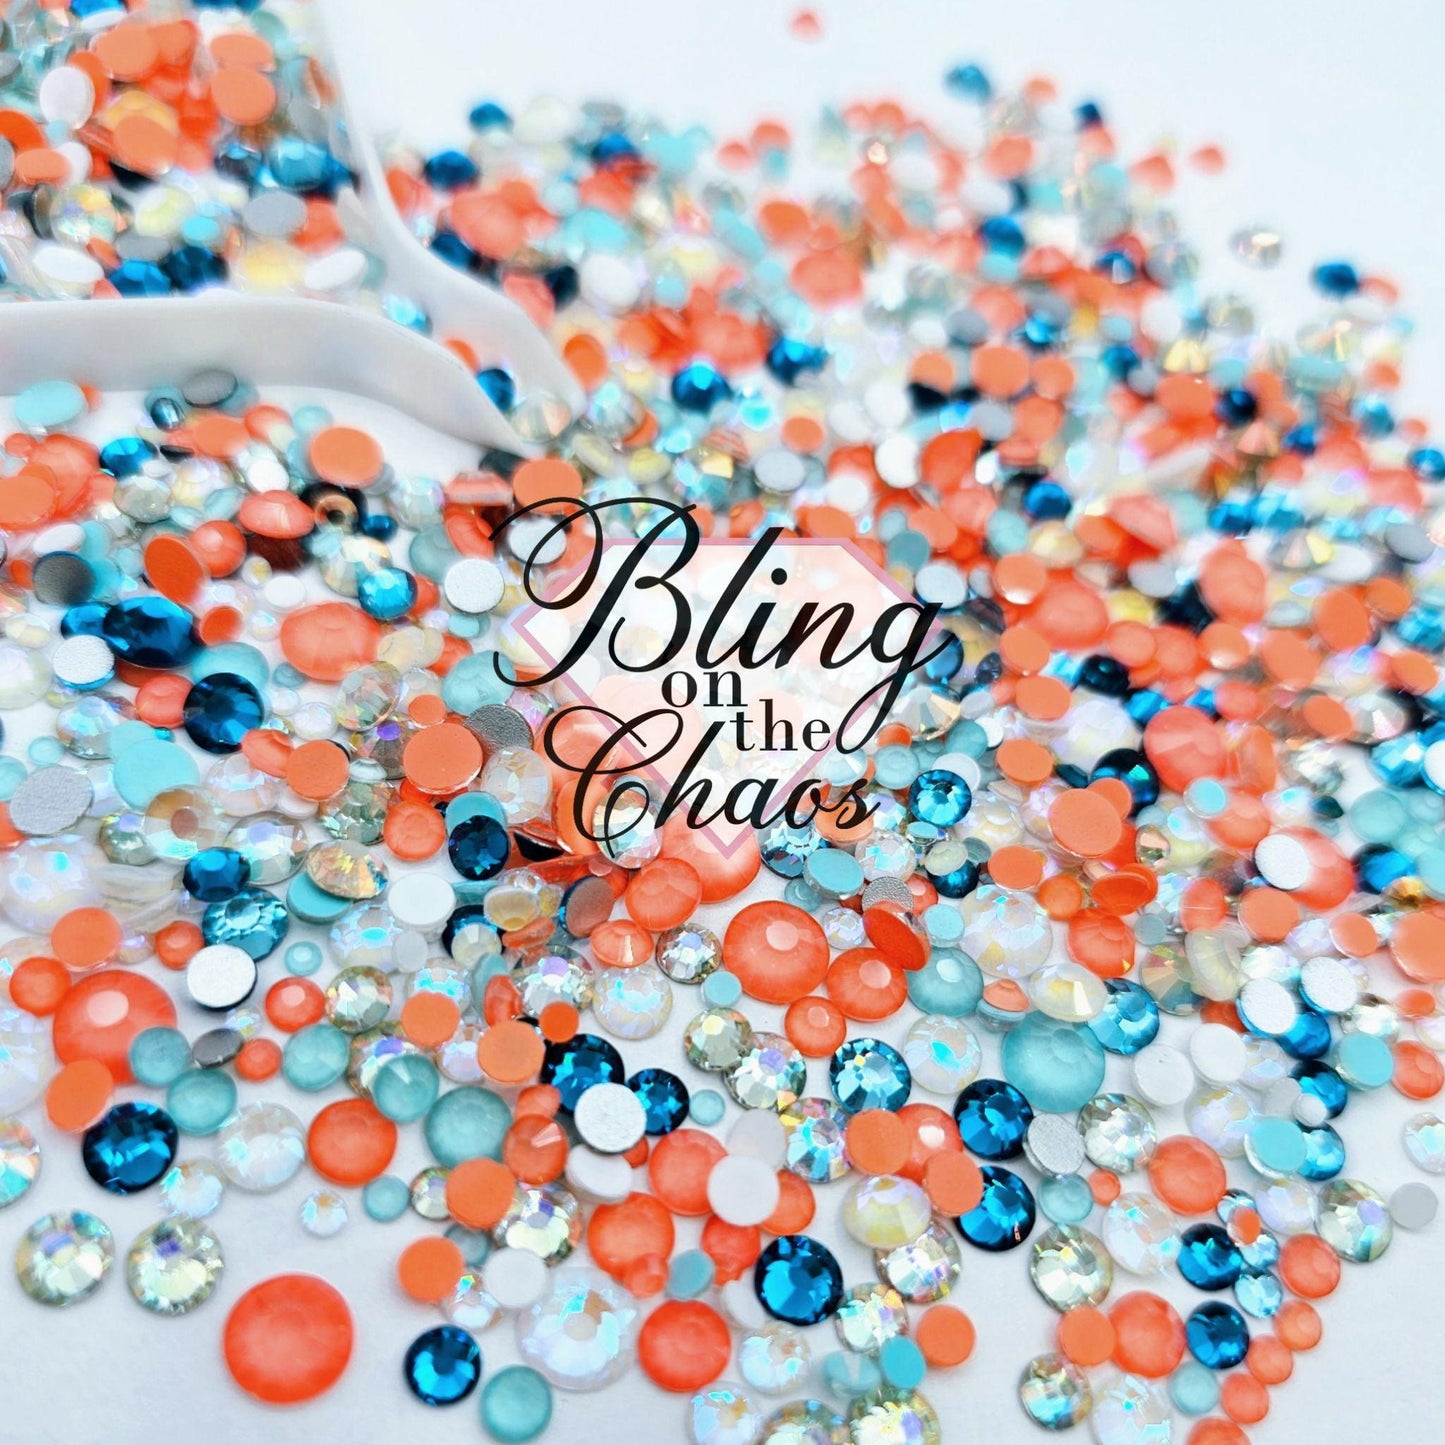 Coral Crush Glow - Specialty Mix-Glass Rhinestones-Bling on the Chaos